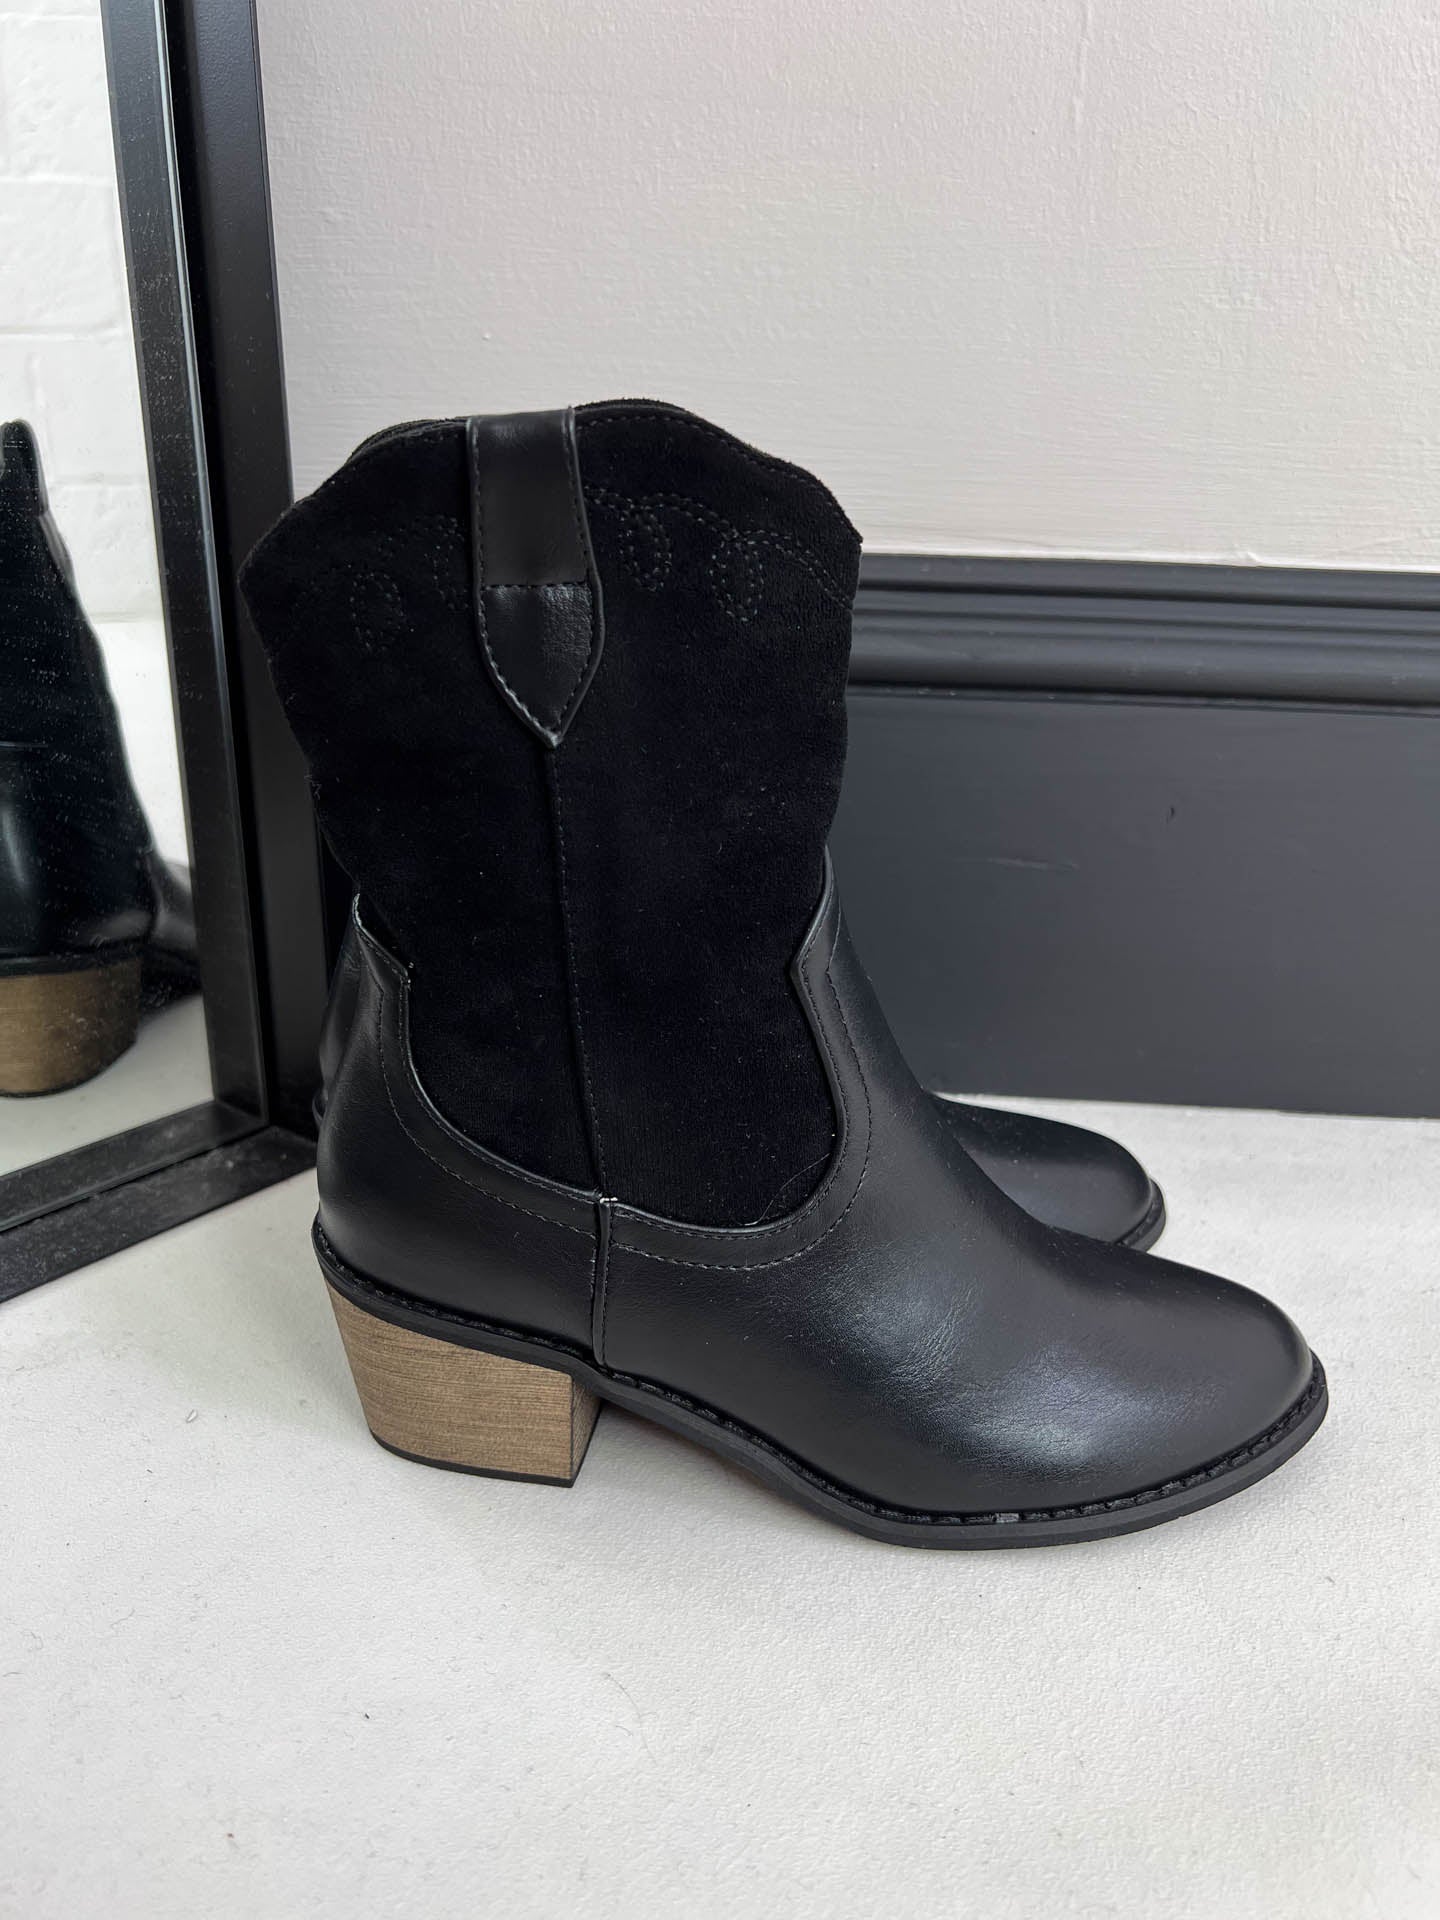 The Adele - Leather & Suede Cowboy Boots